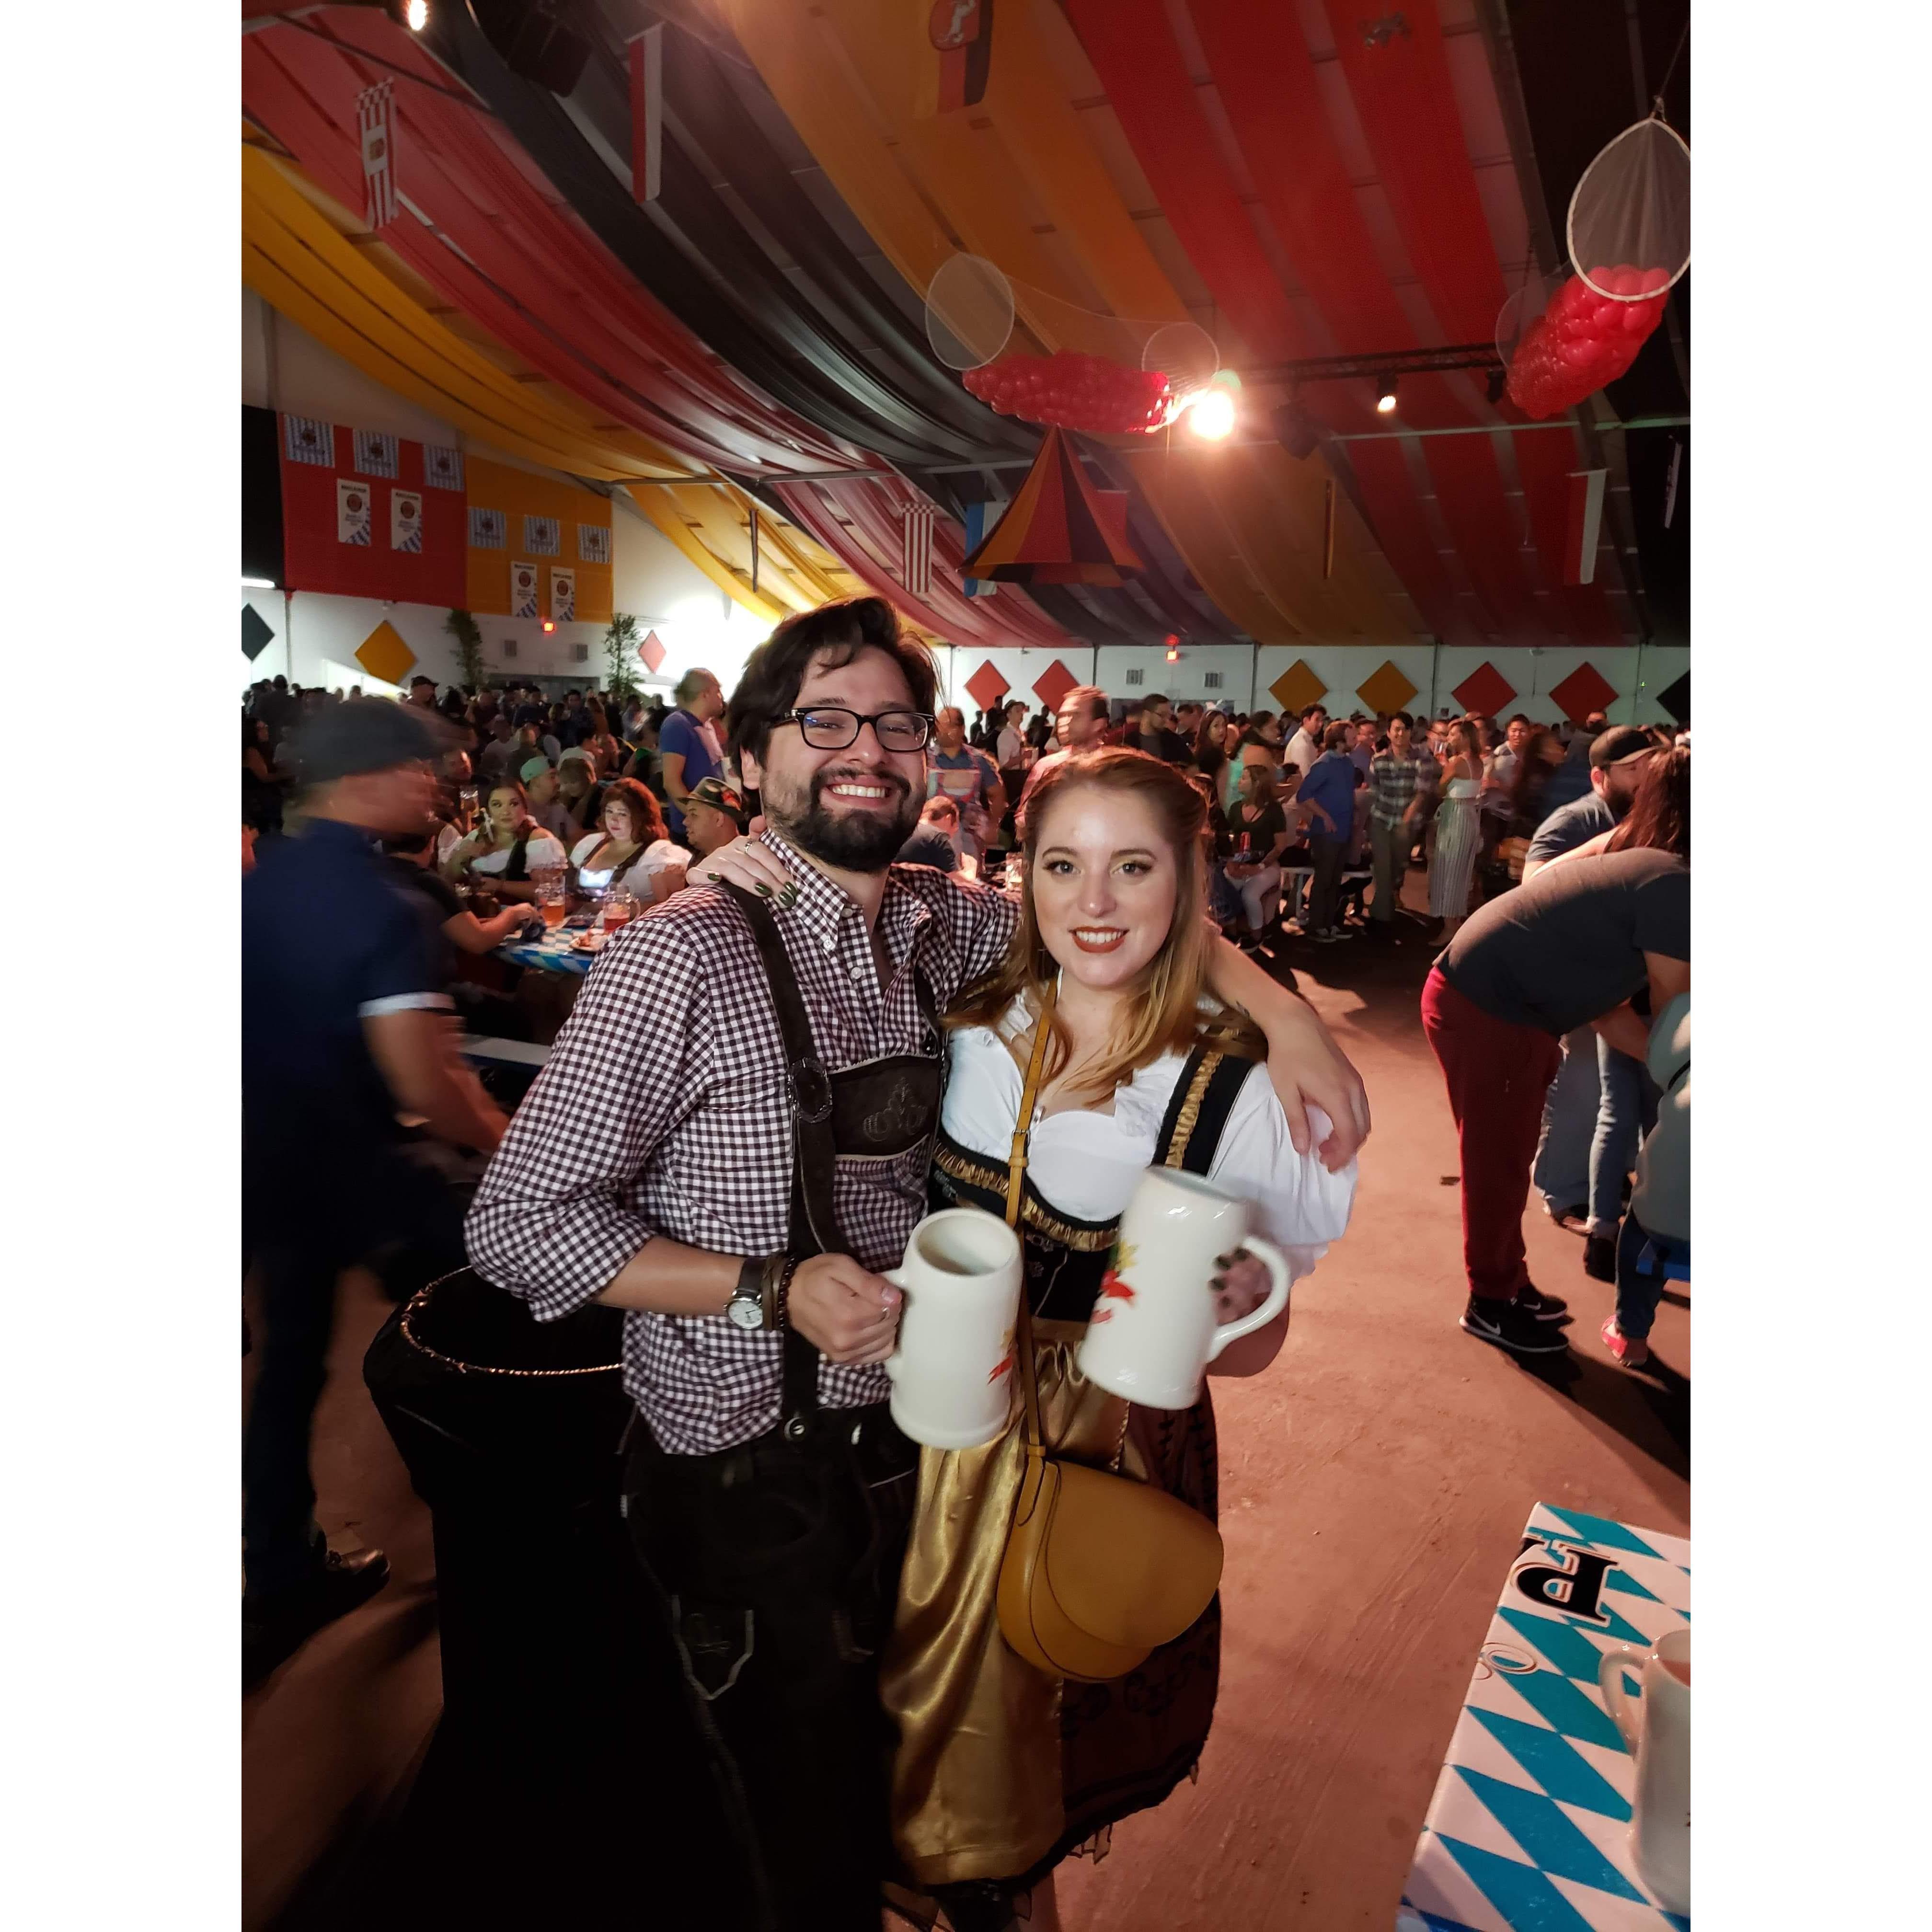 Our first Oktoberfest together